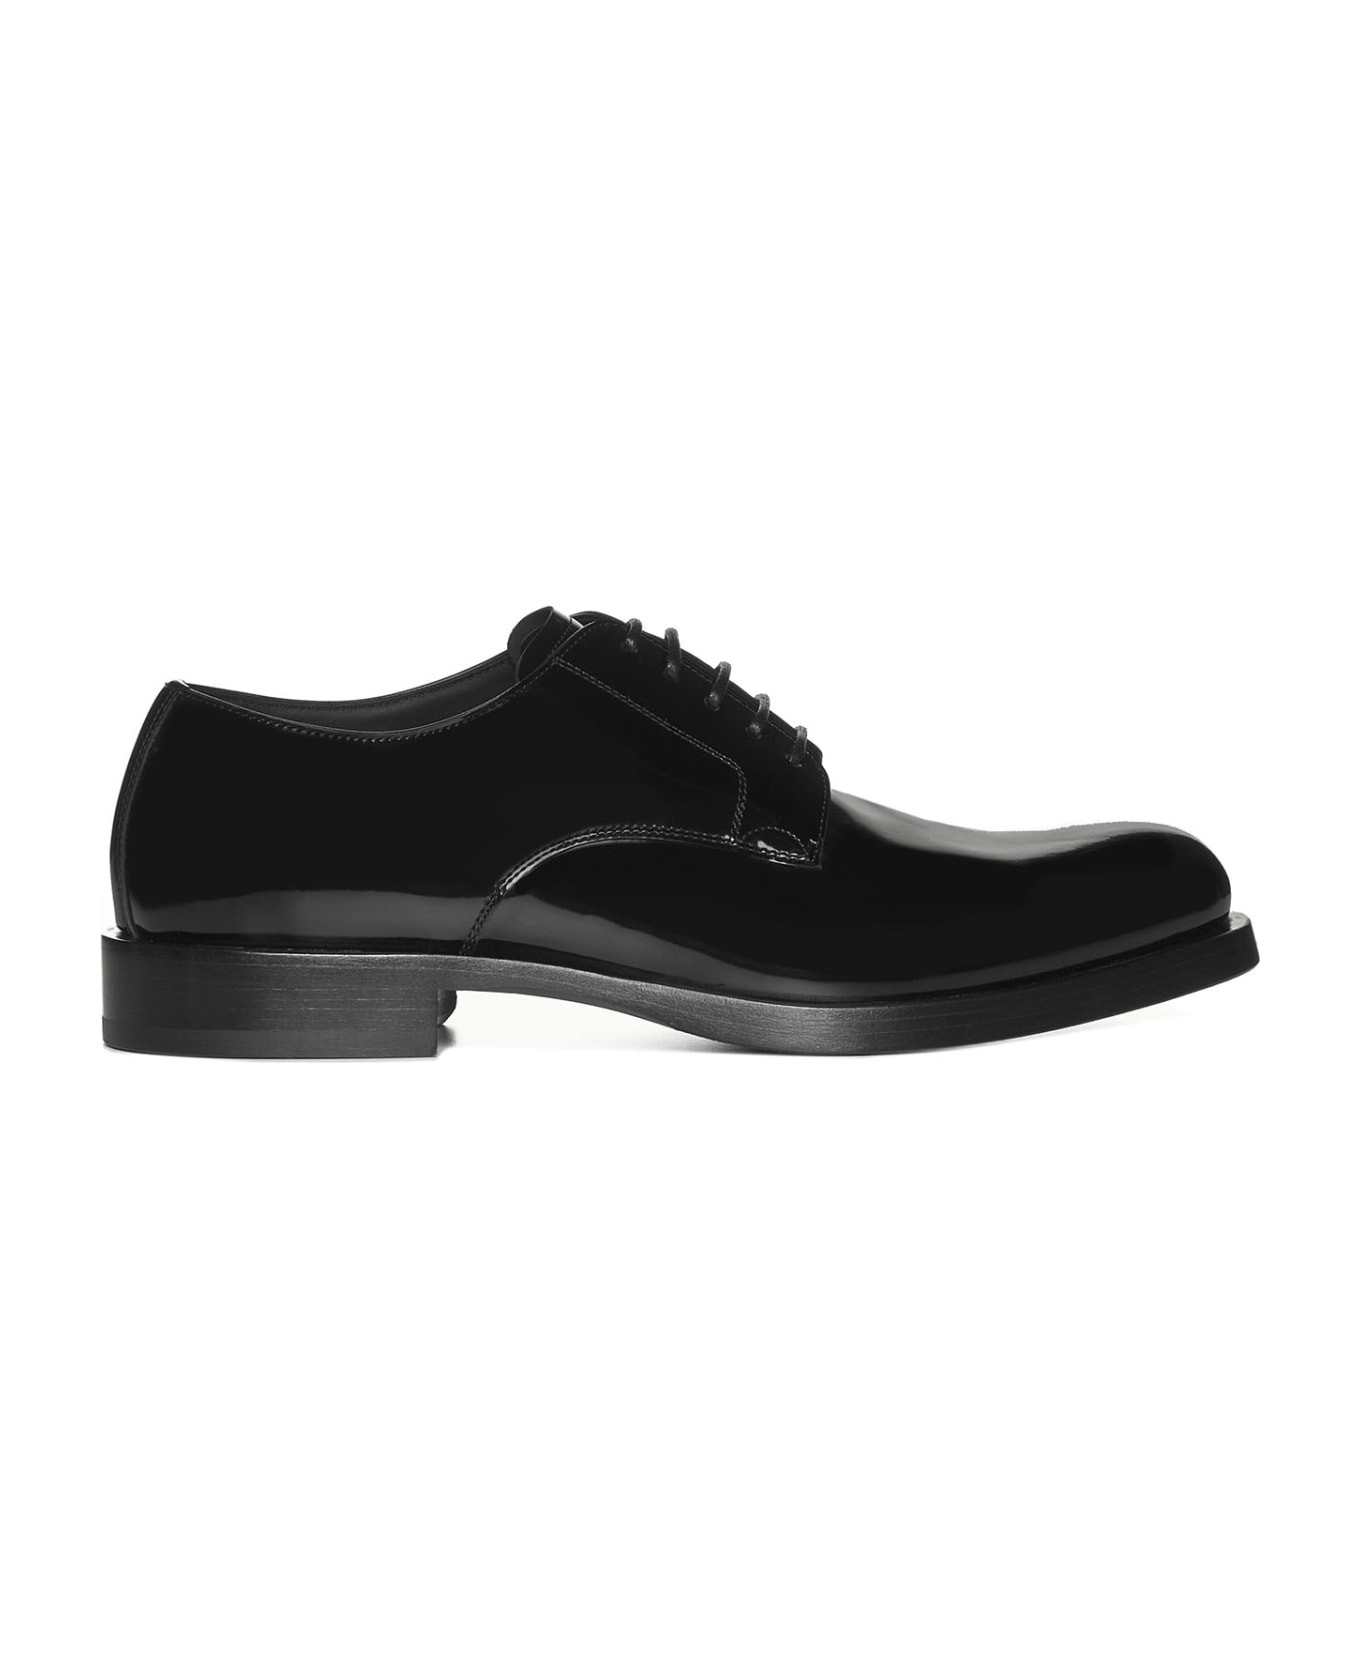 Dolce & Gabbana Classic Lace-up Derby Shoes - Nero ローファー＆デッキシューズ